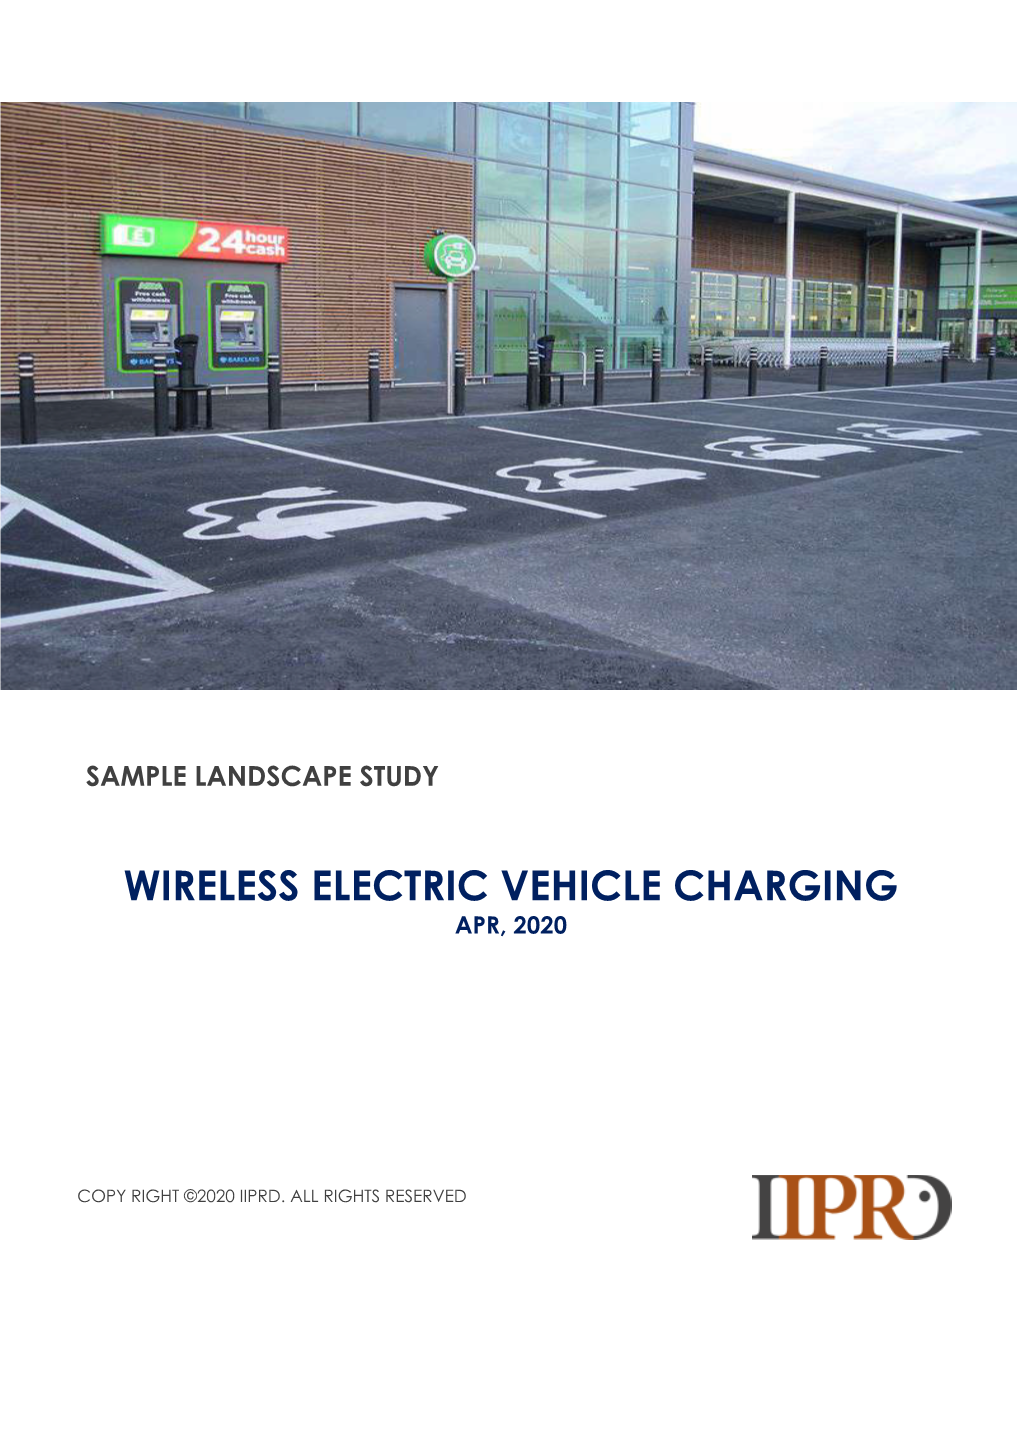 Wireless Electric Vehicle Charging Apr, 2020